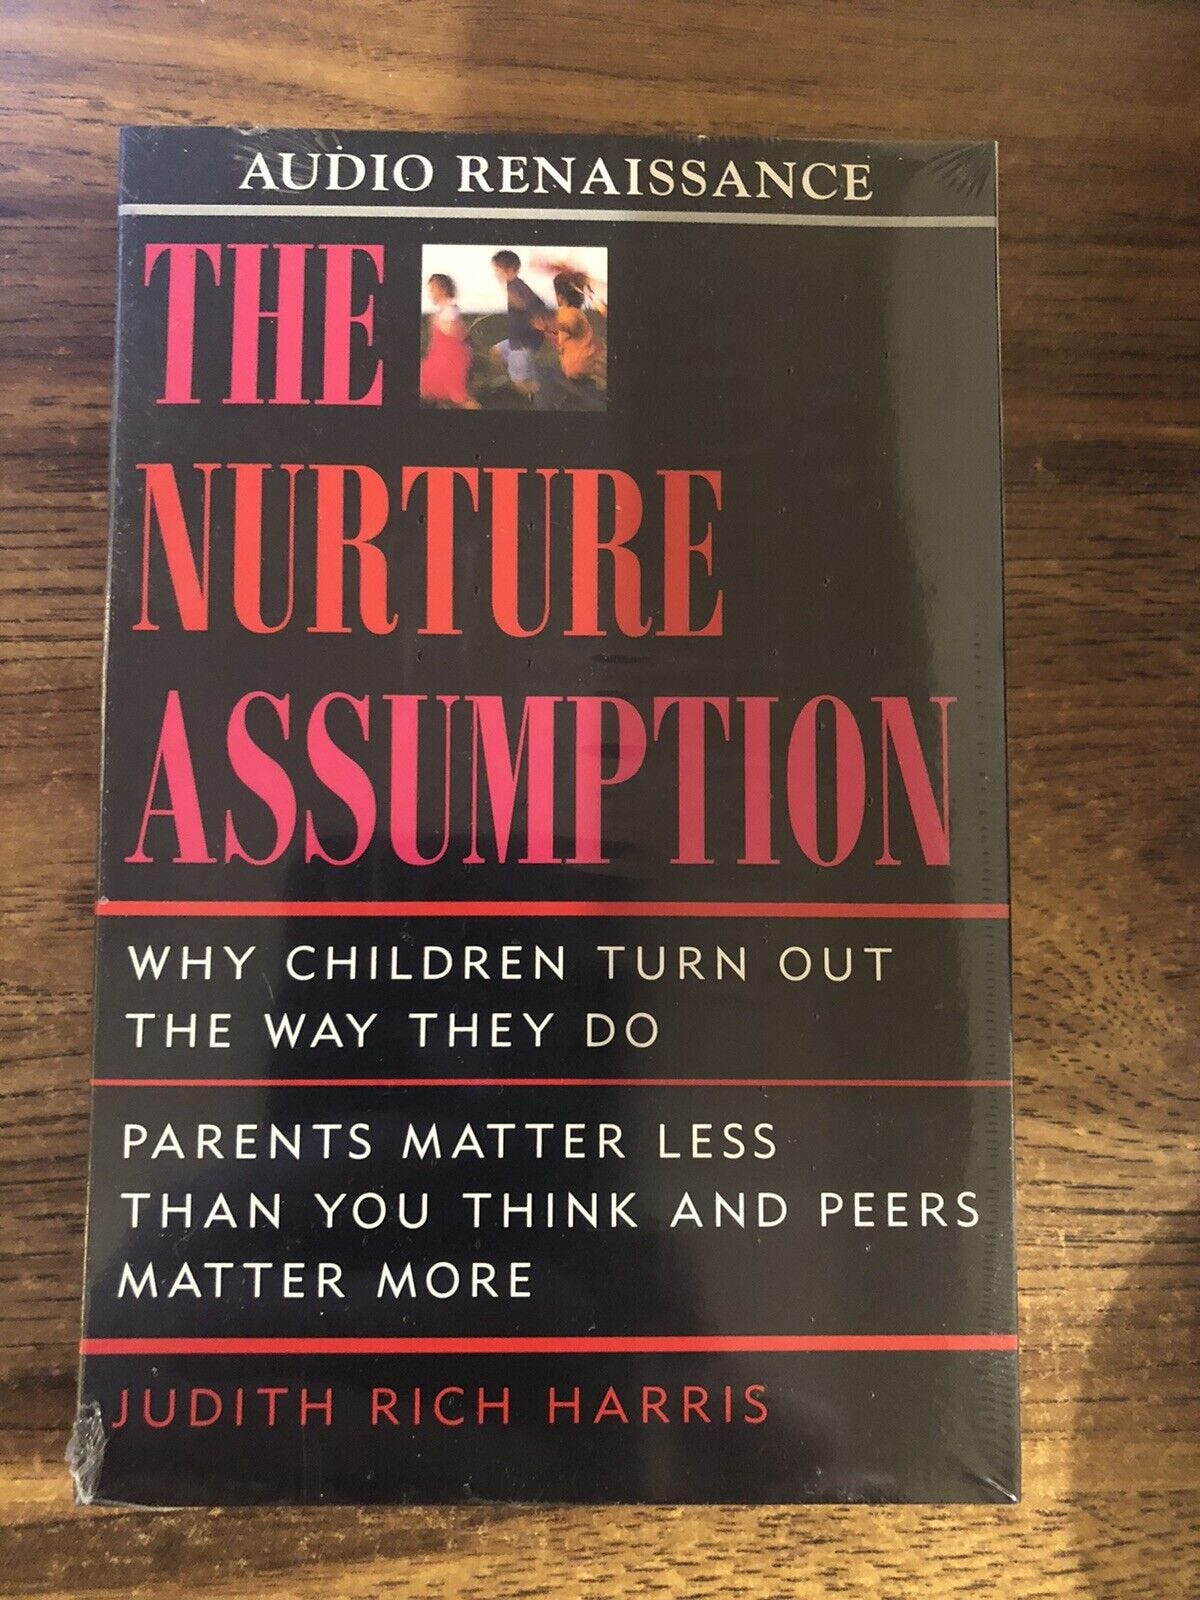 The NURTURE ASSUMPTION: WHY CHILDREN TURN OUT THE WAY THEY DO - audiobook |  eBay